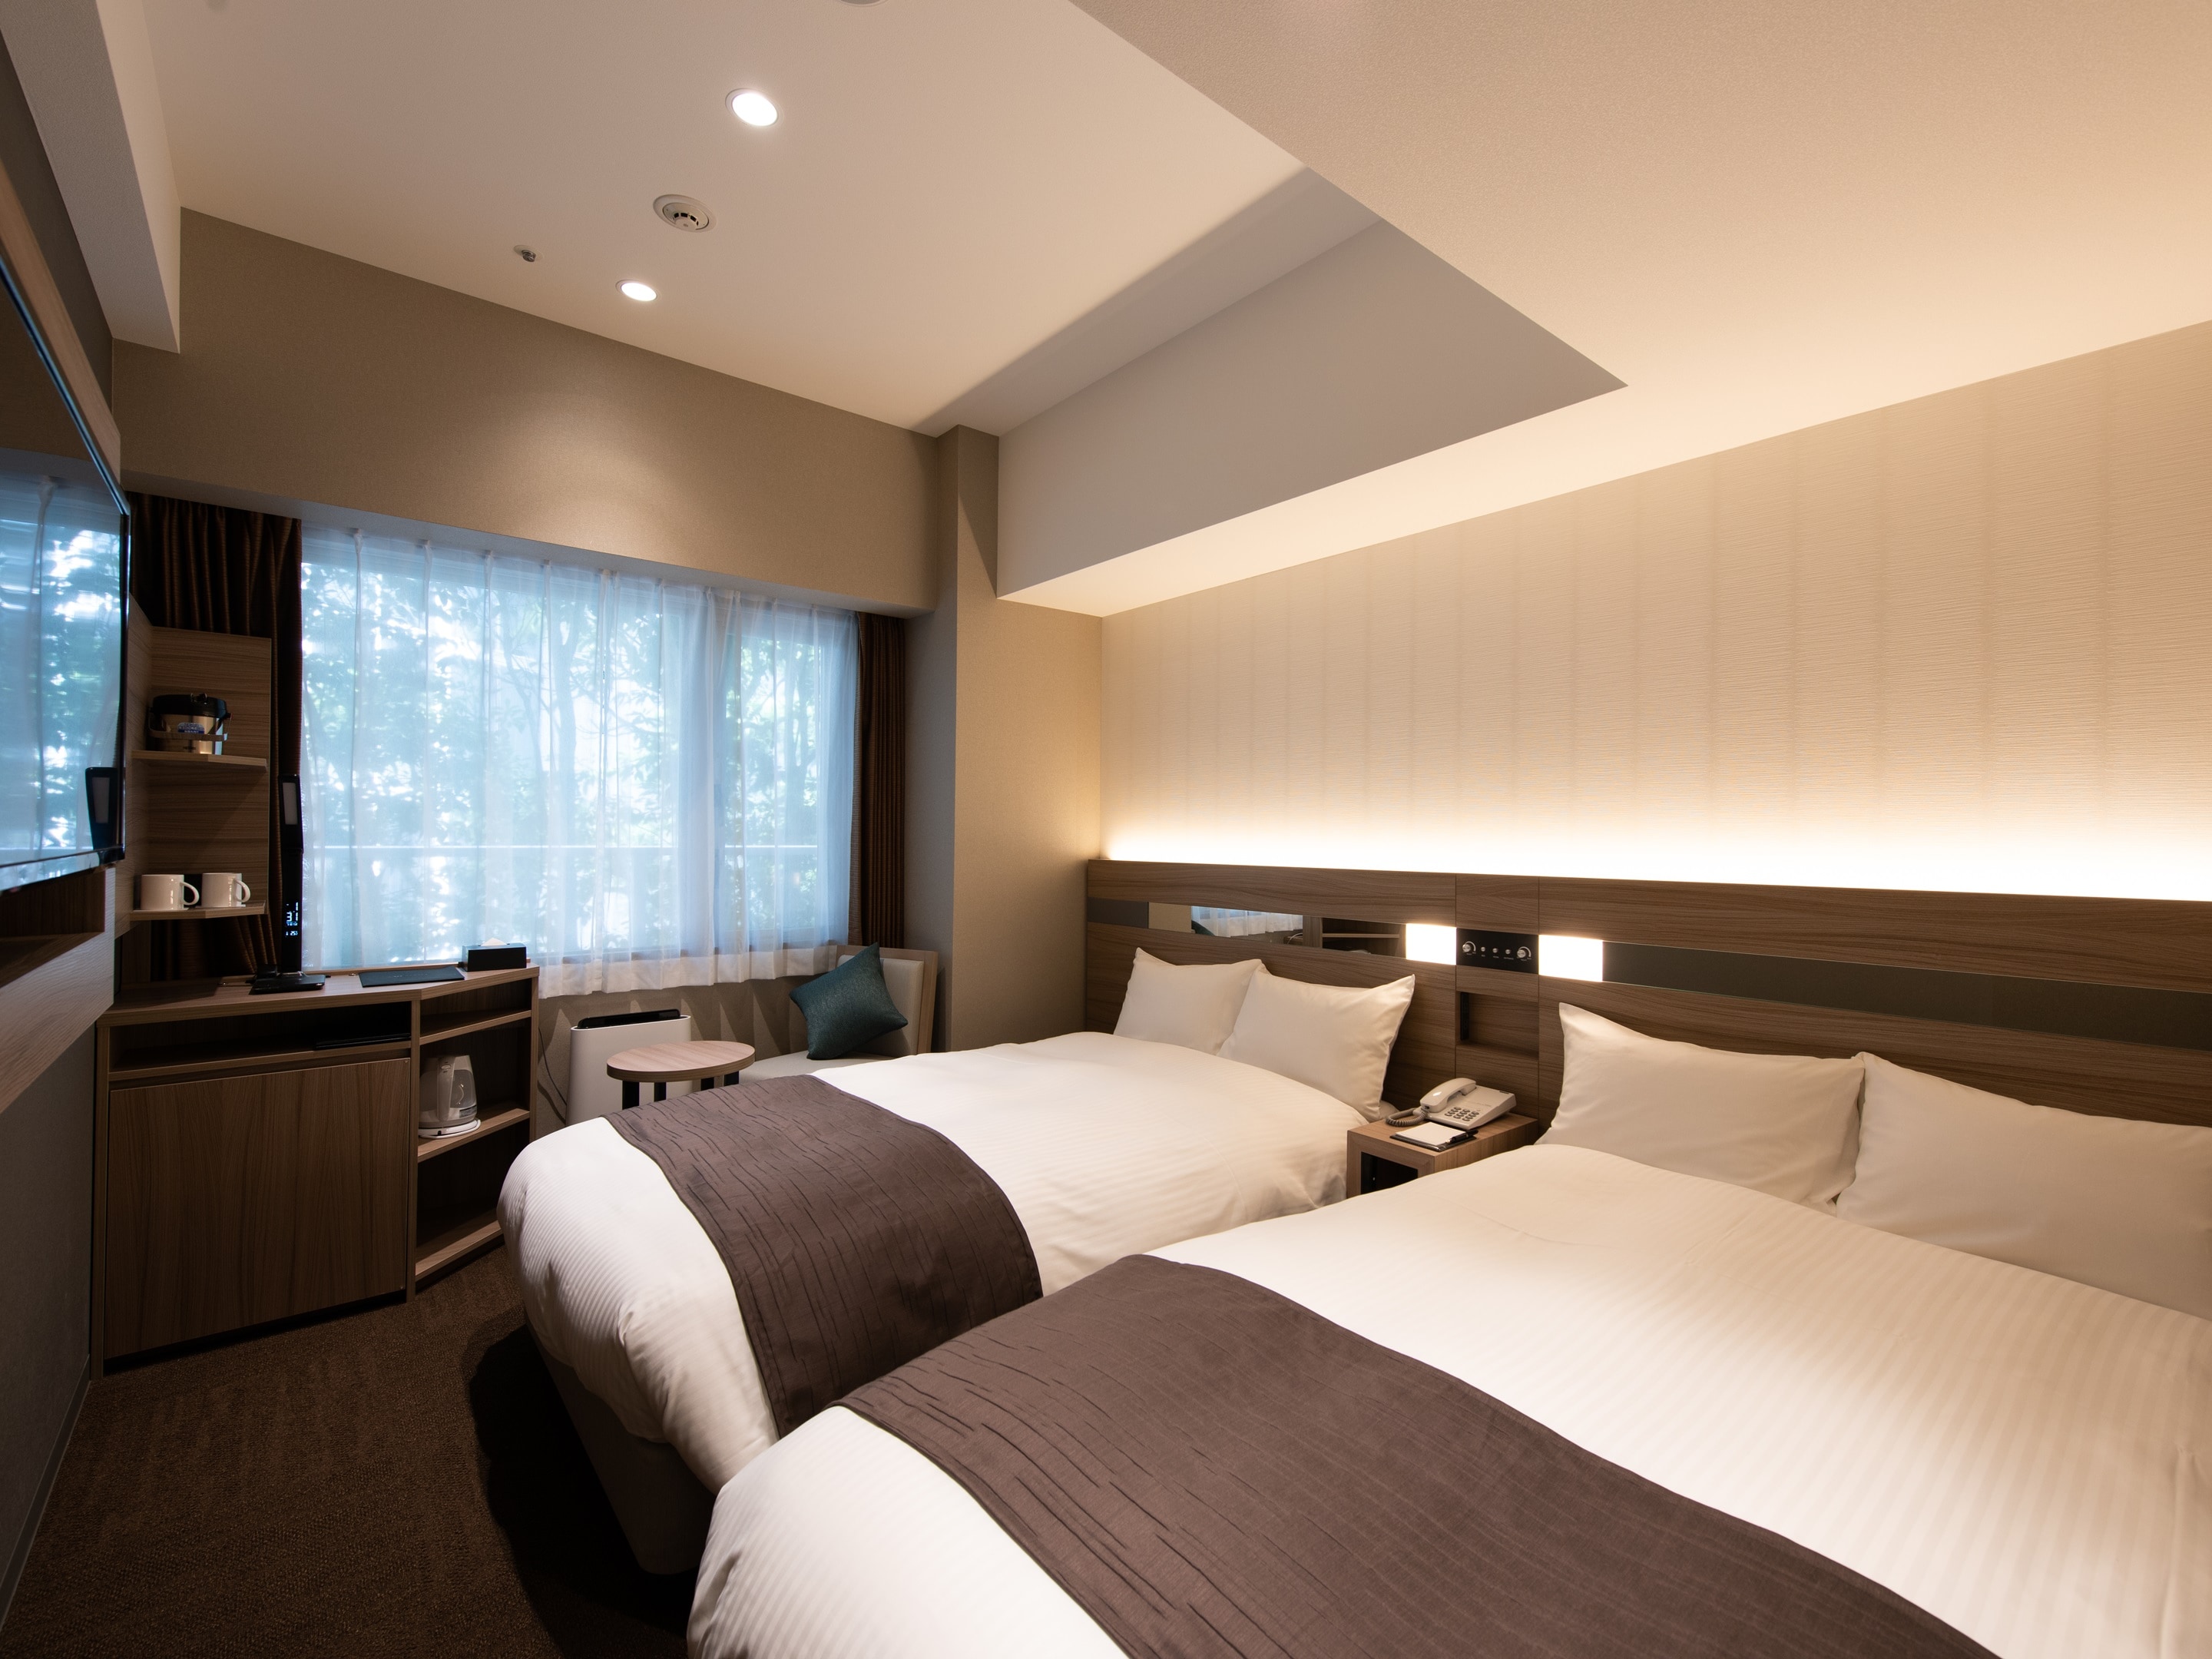 [Moderate West Twin] The newly built stylish guest rooms provide a functional and sophisticated stay.